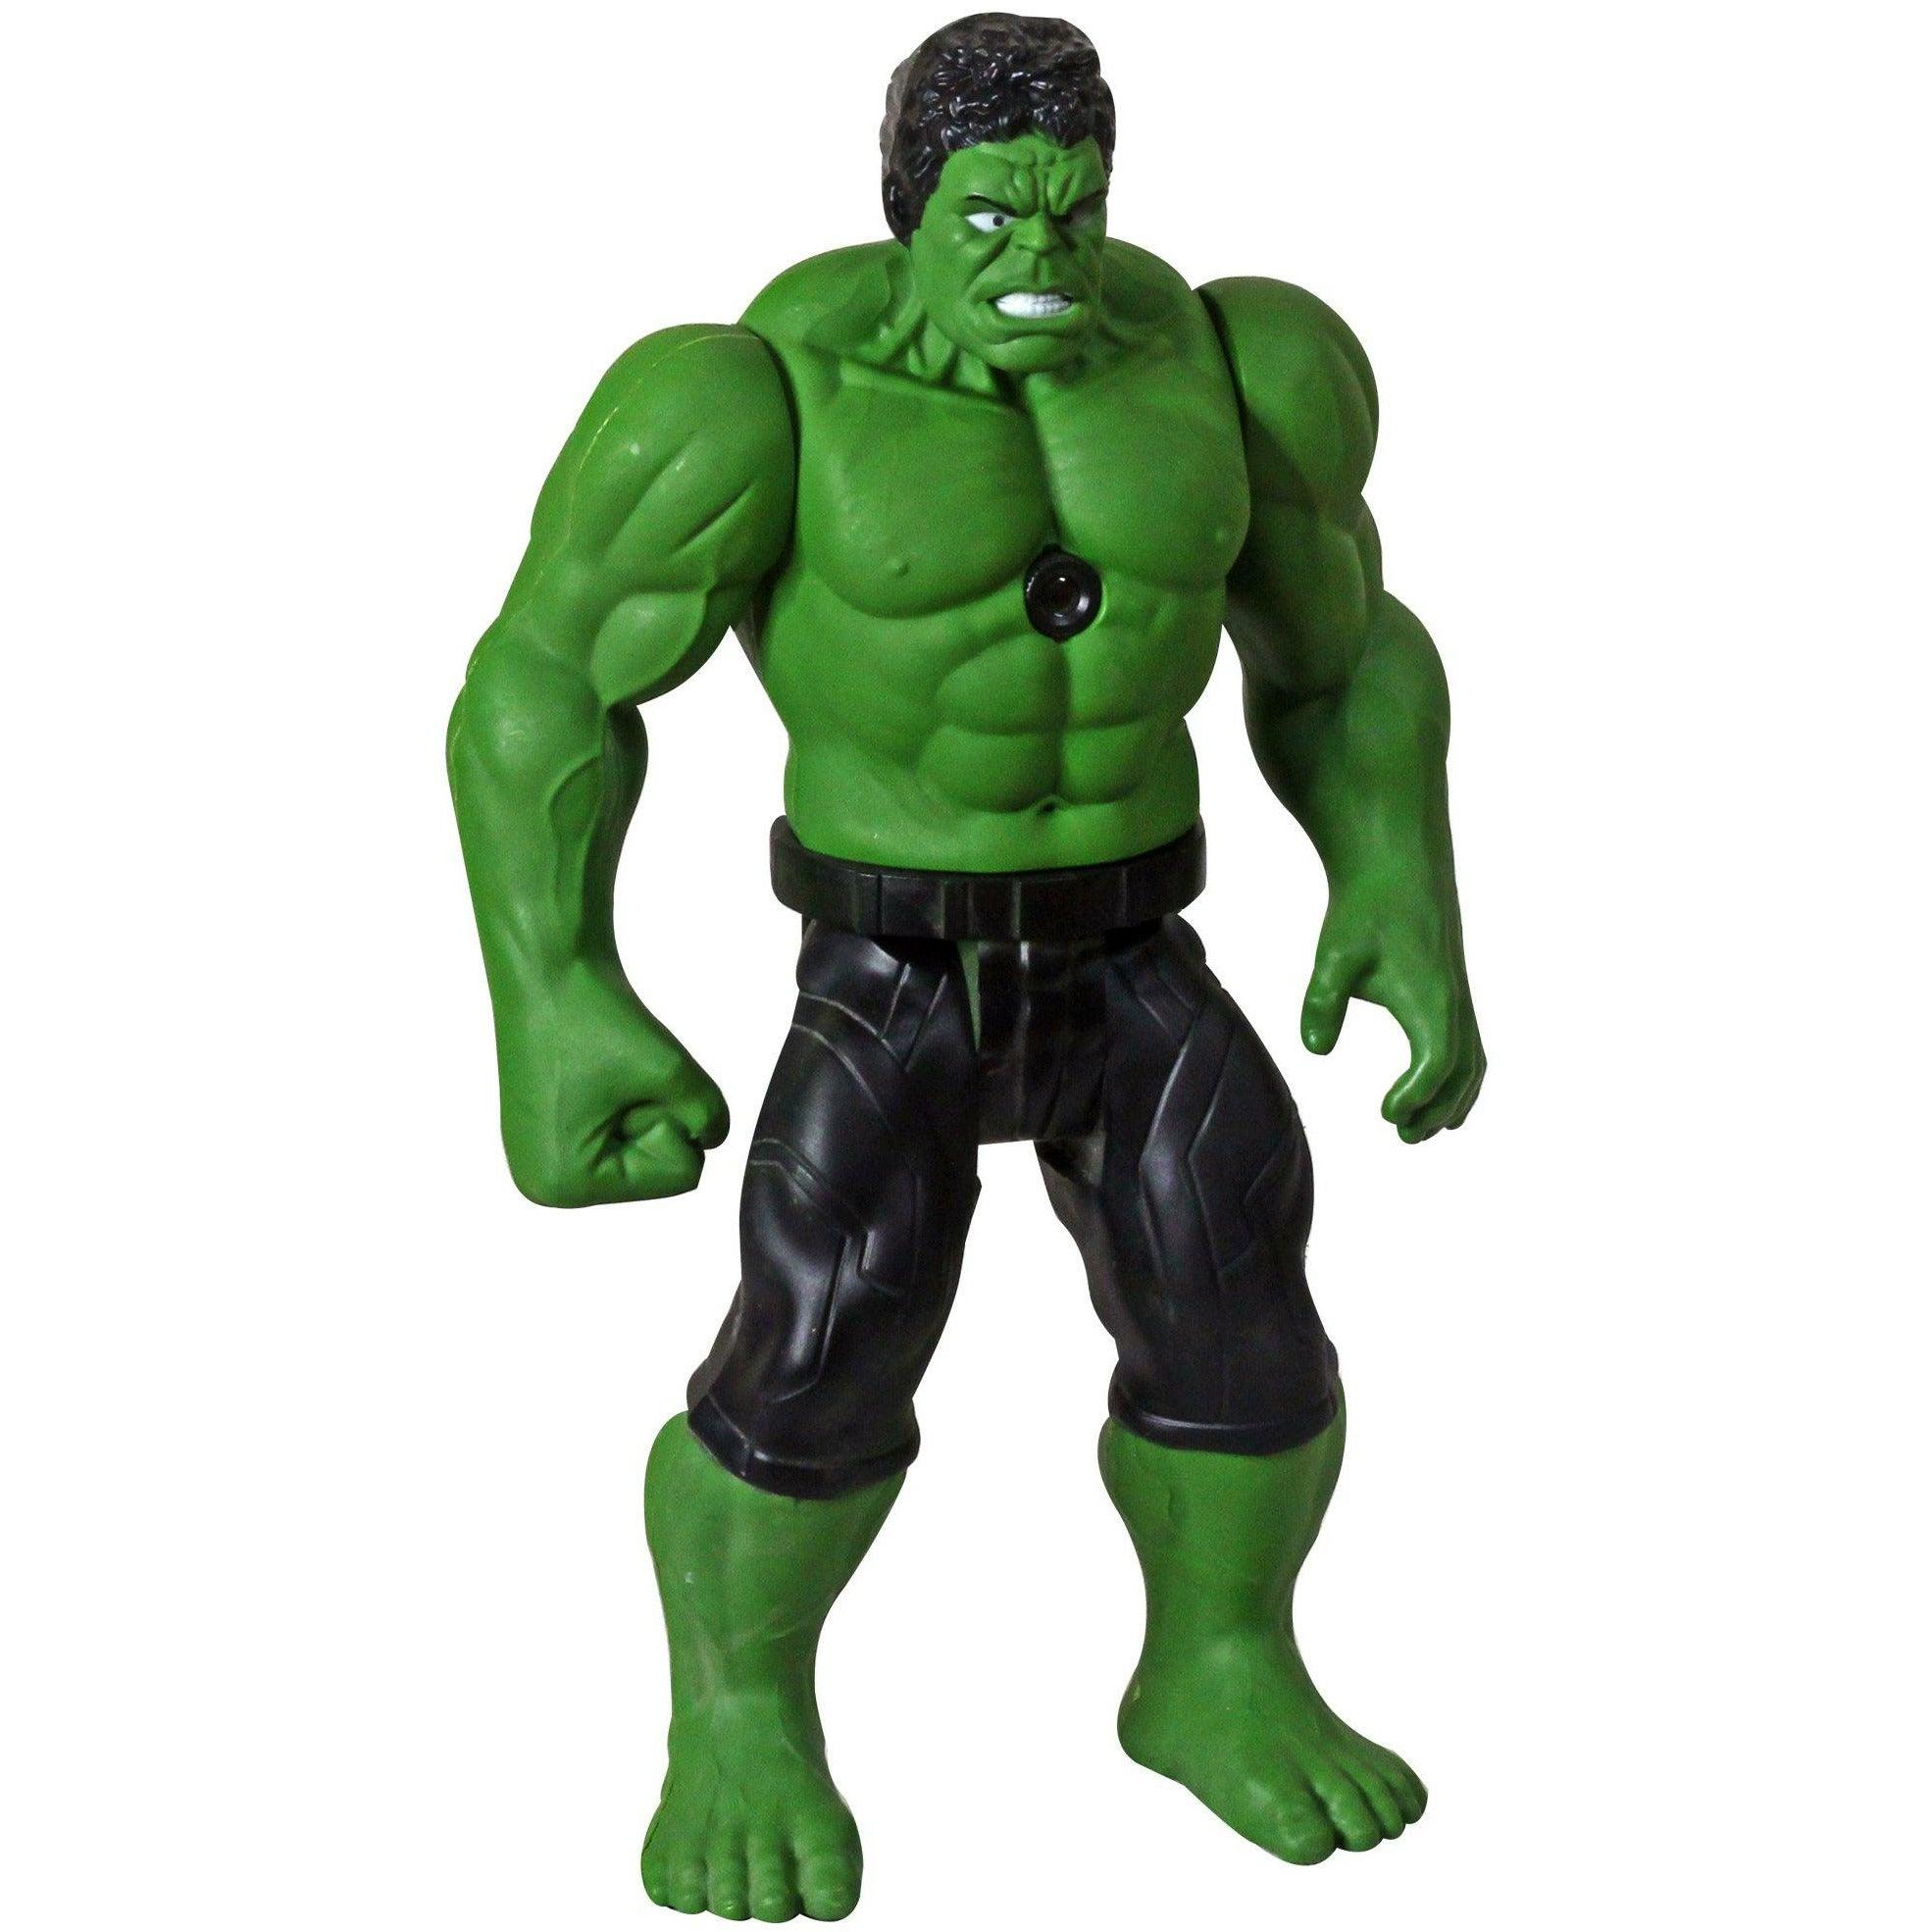 Avengers Hulk Action Figure Projector 24 Patterns Show - BumbleToys - 5-7 Years, Action Battling, Avengers, Boys, Hulk, Toy House